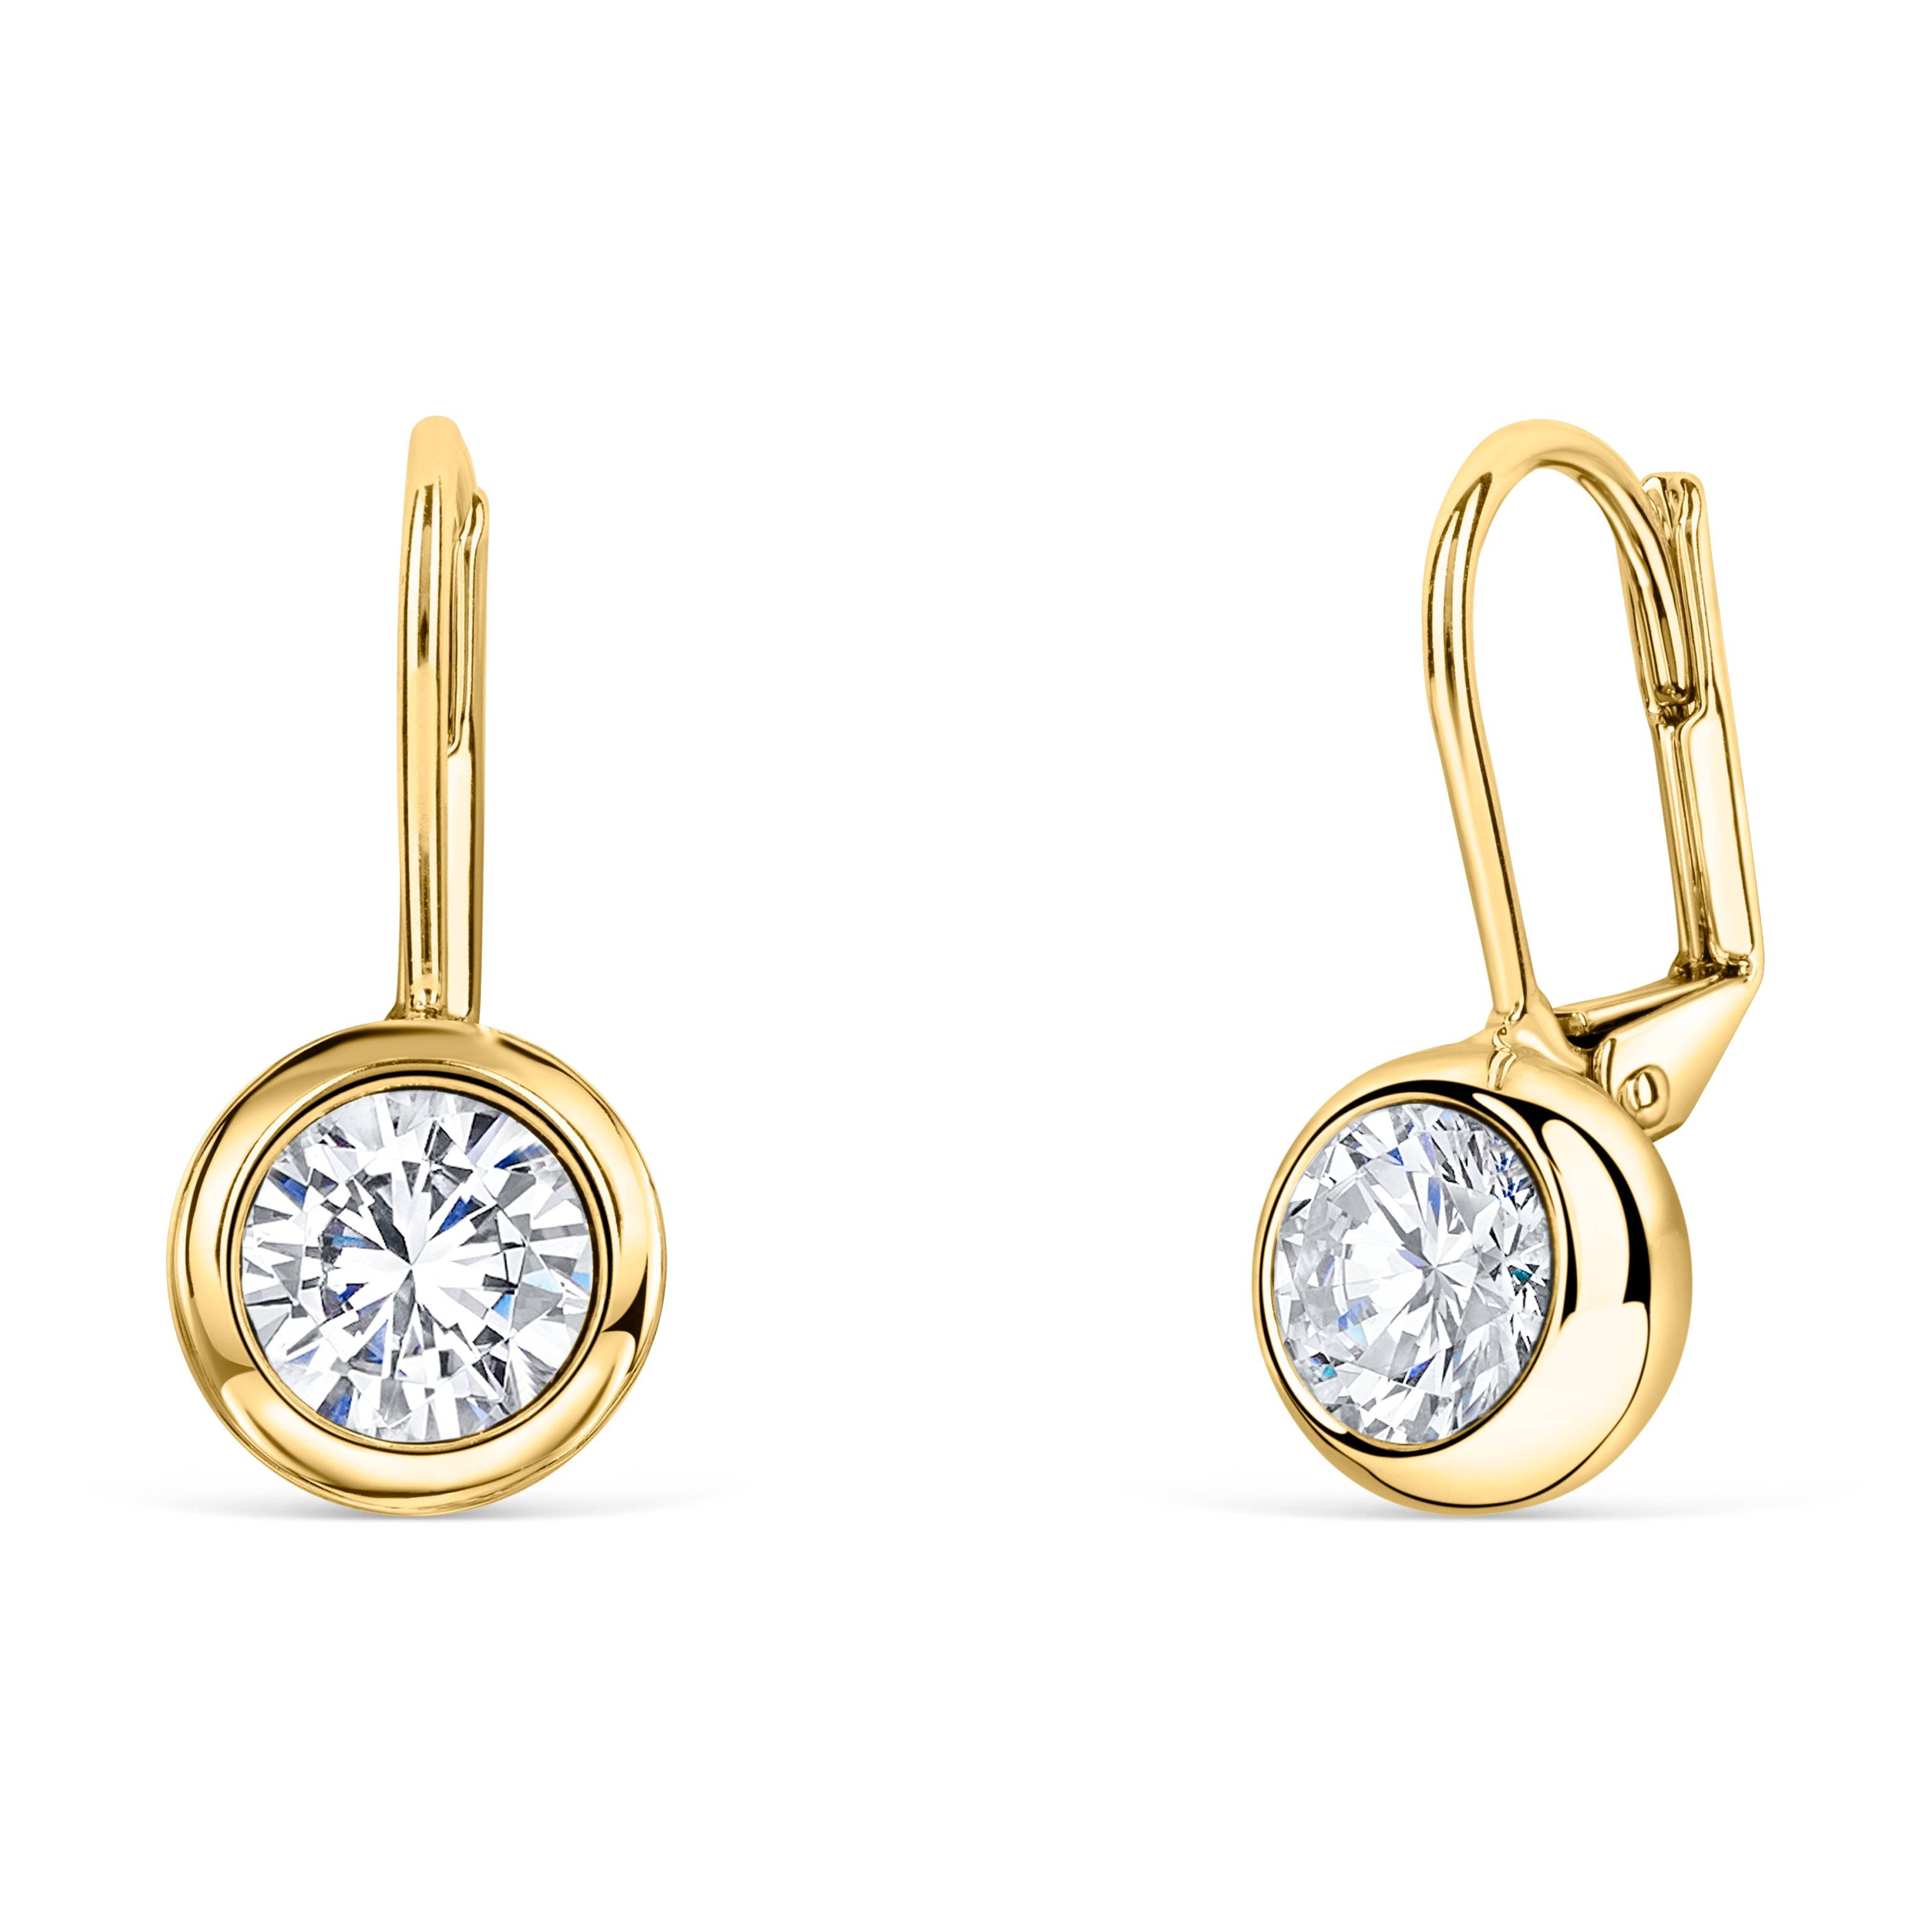 Shop Illuminating Round Drop Solitaire Earrings – ORIONZ